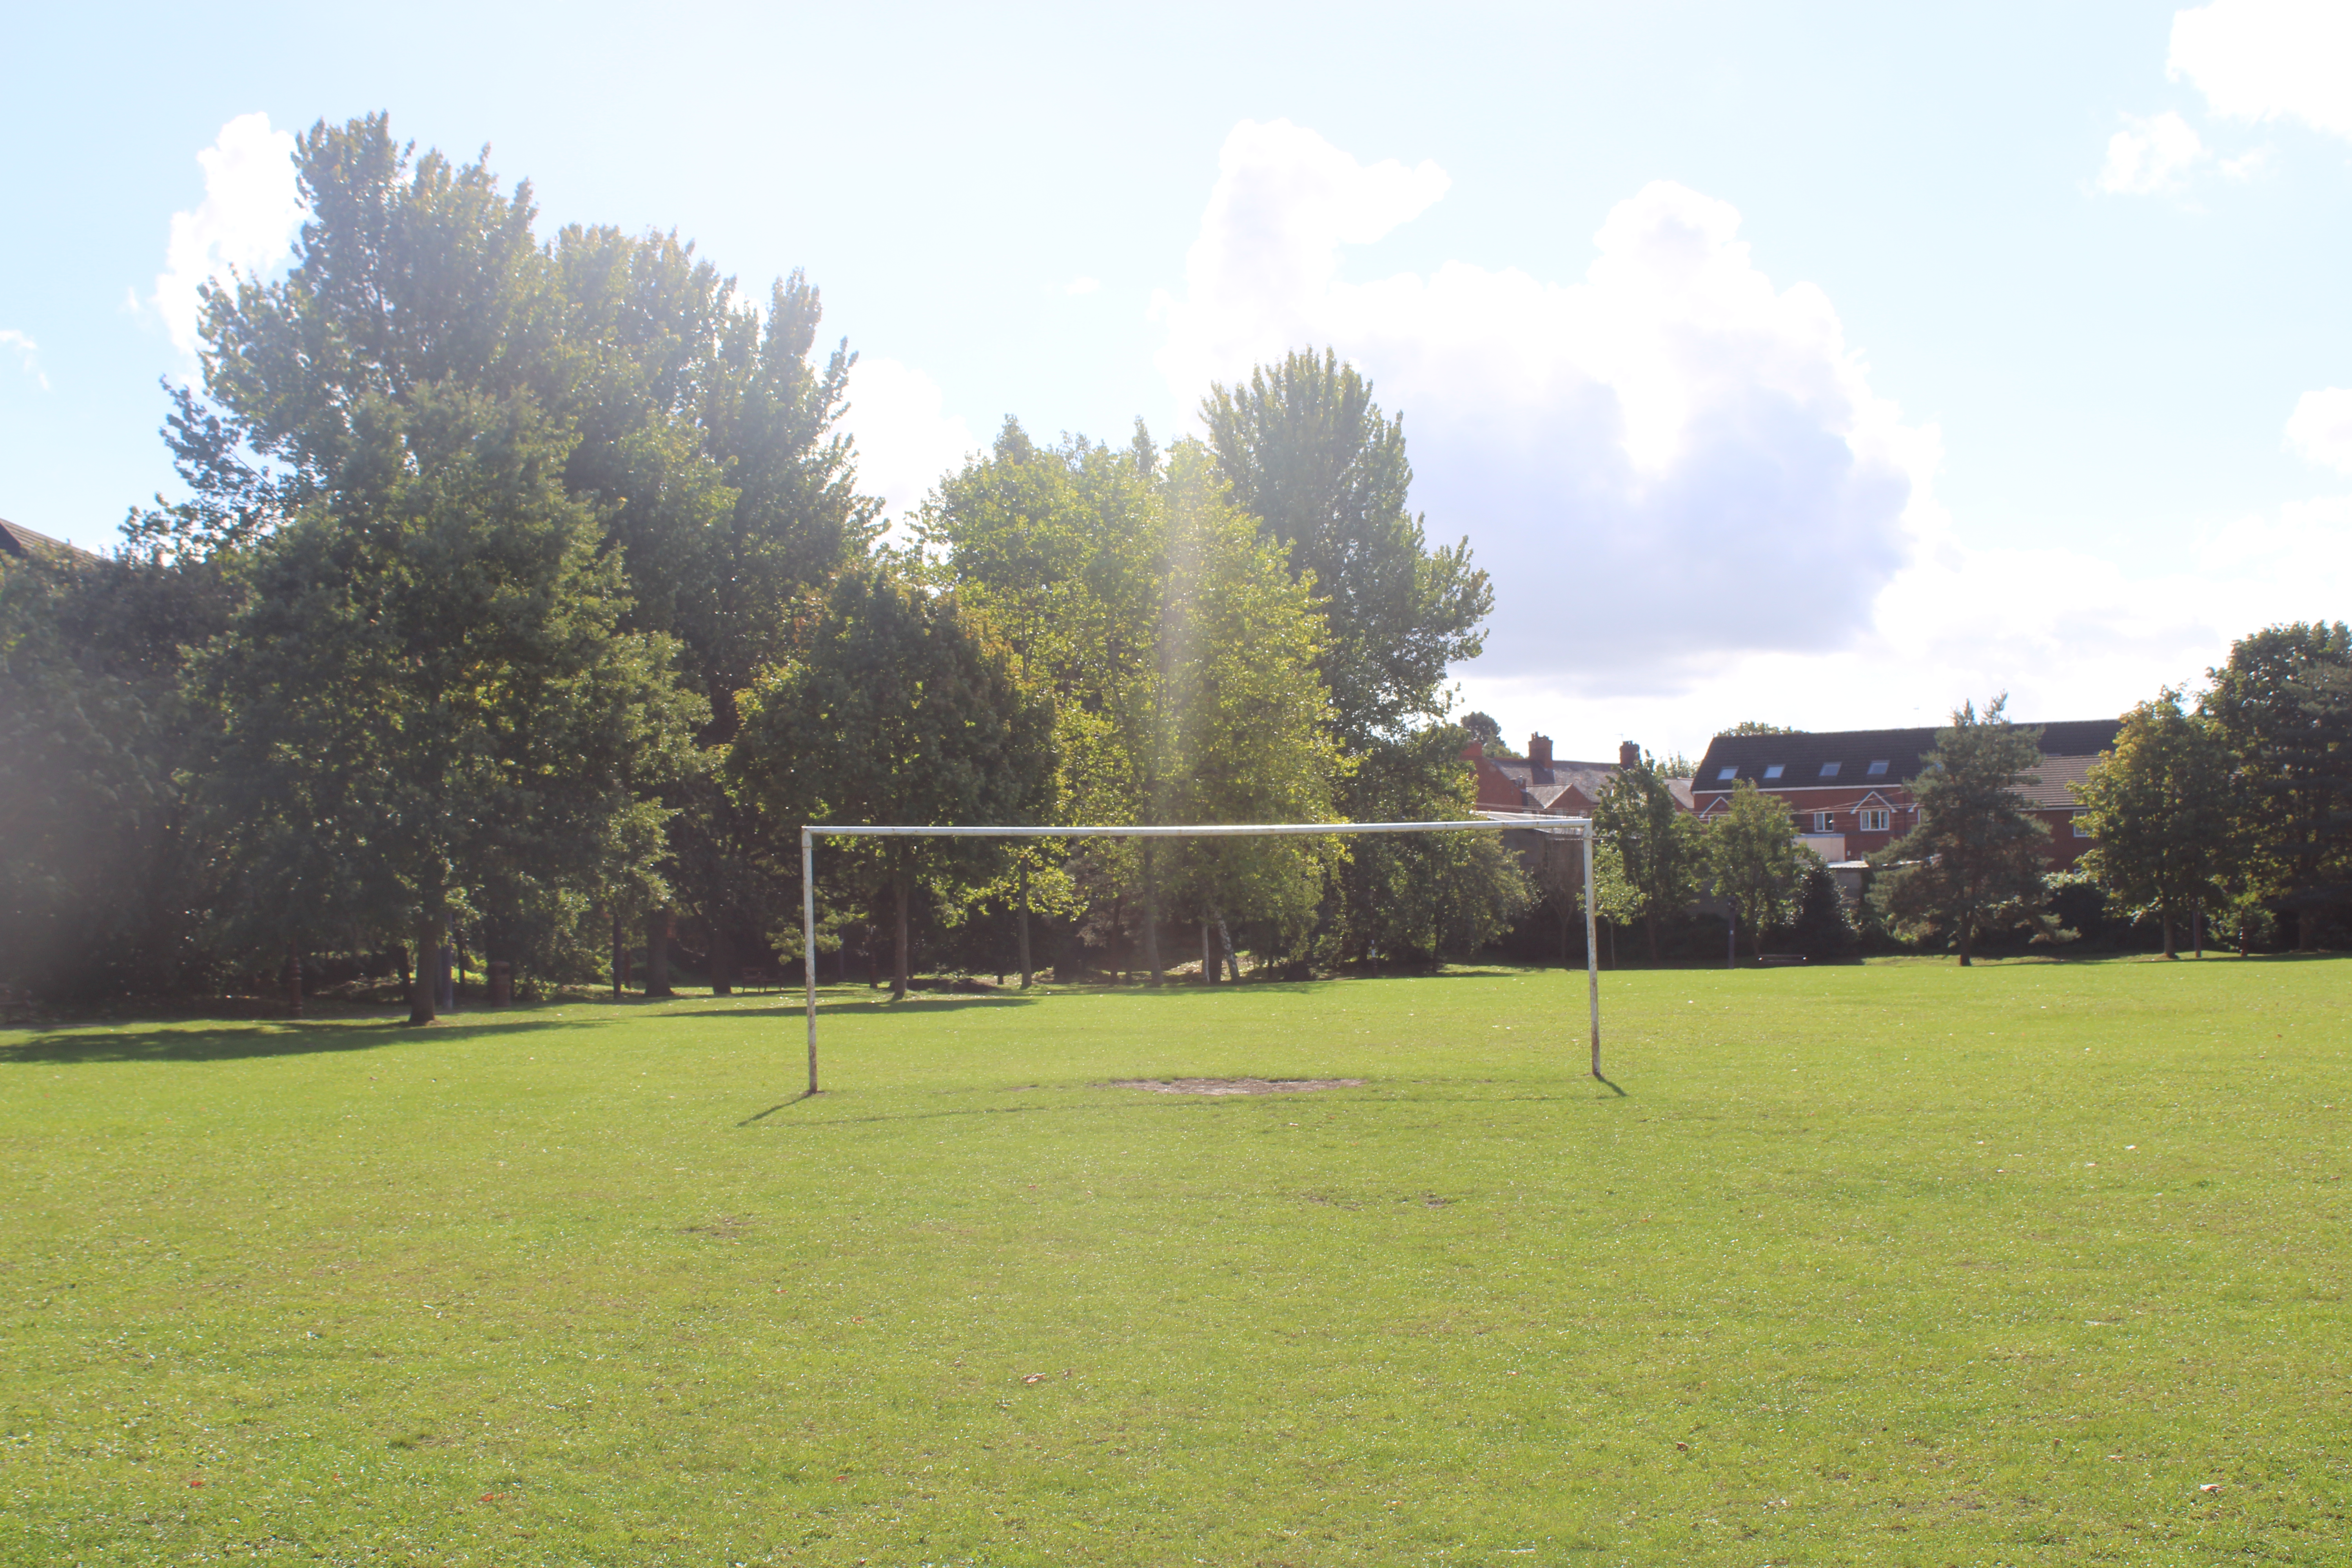 A football pitch in Wales with green grass and a goal.